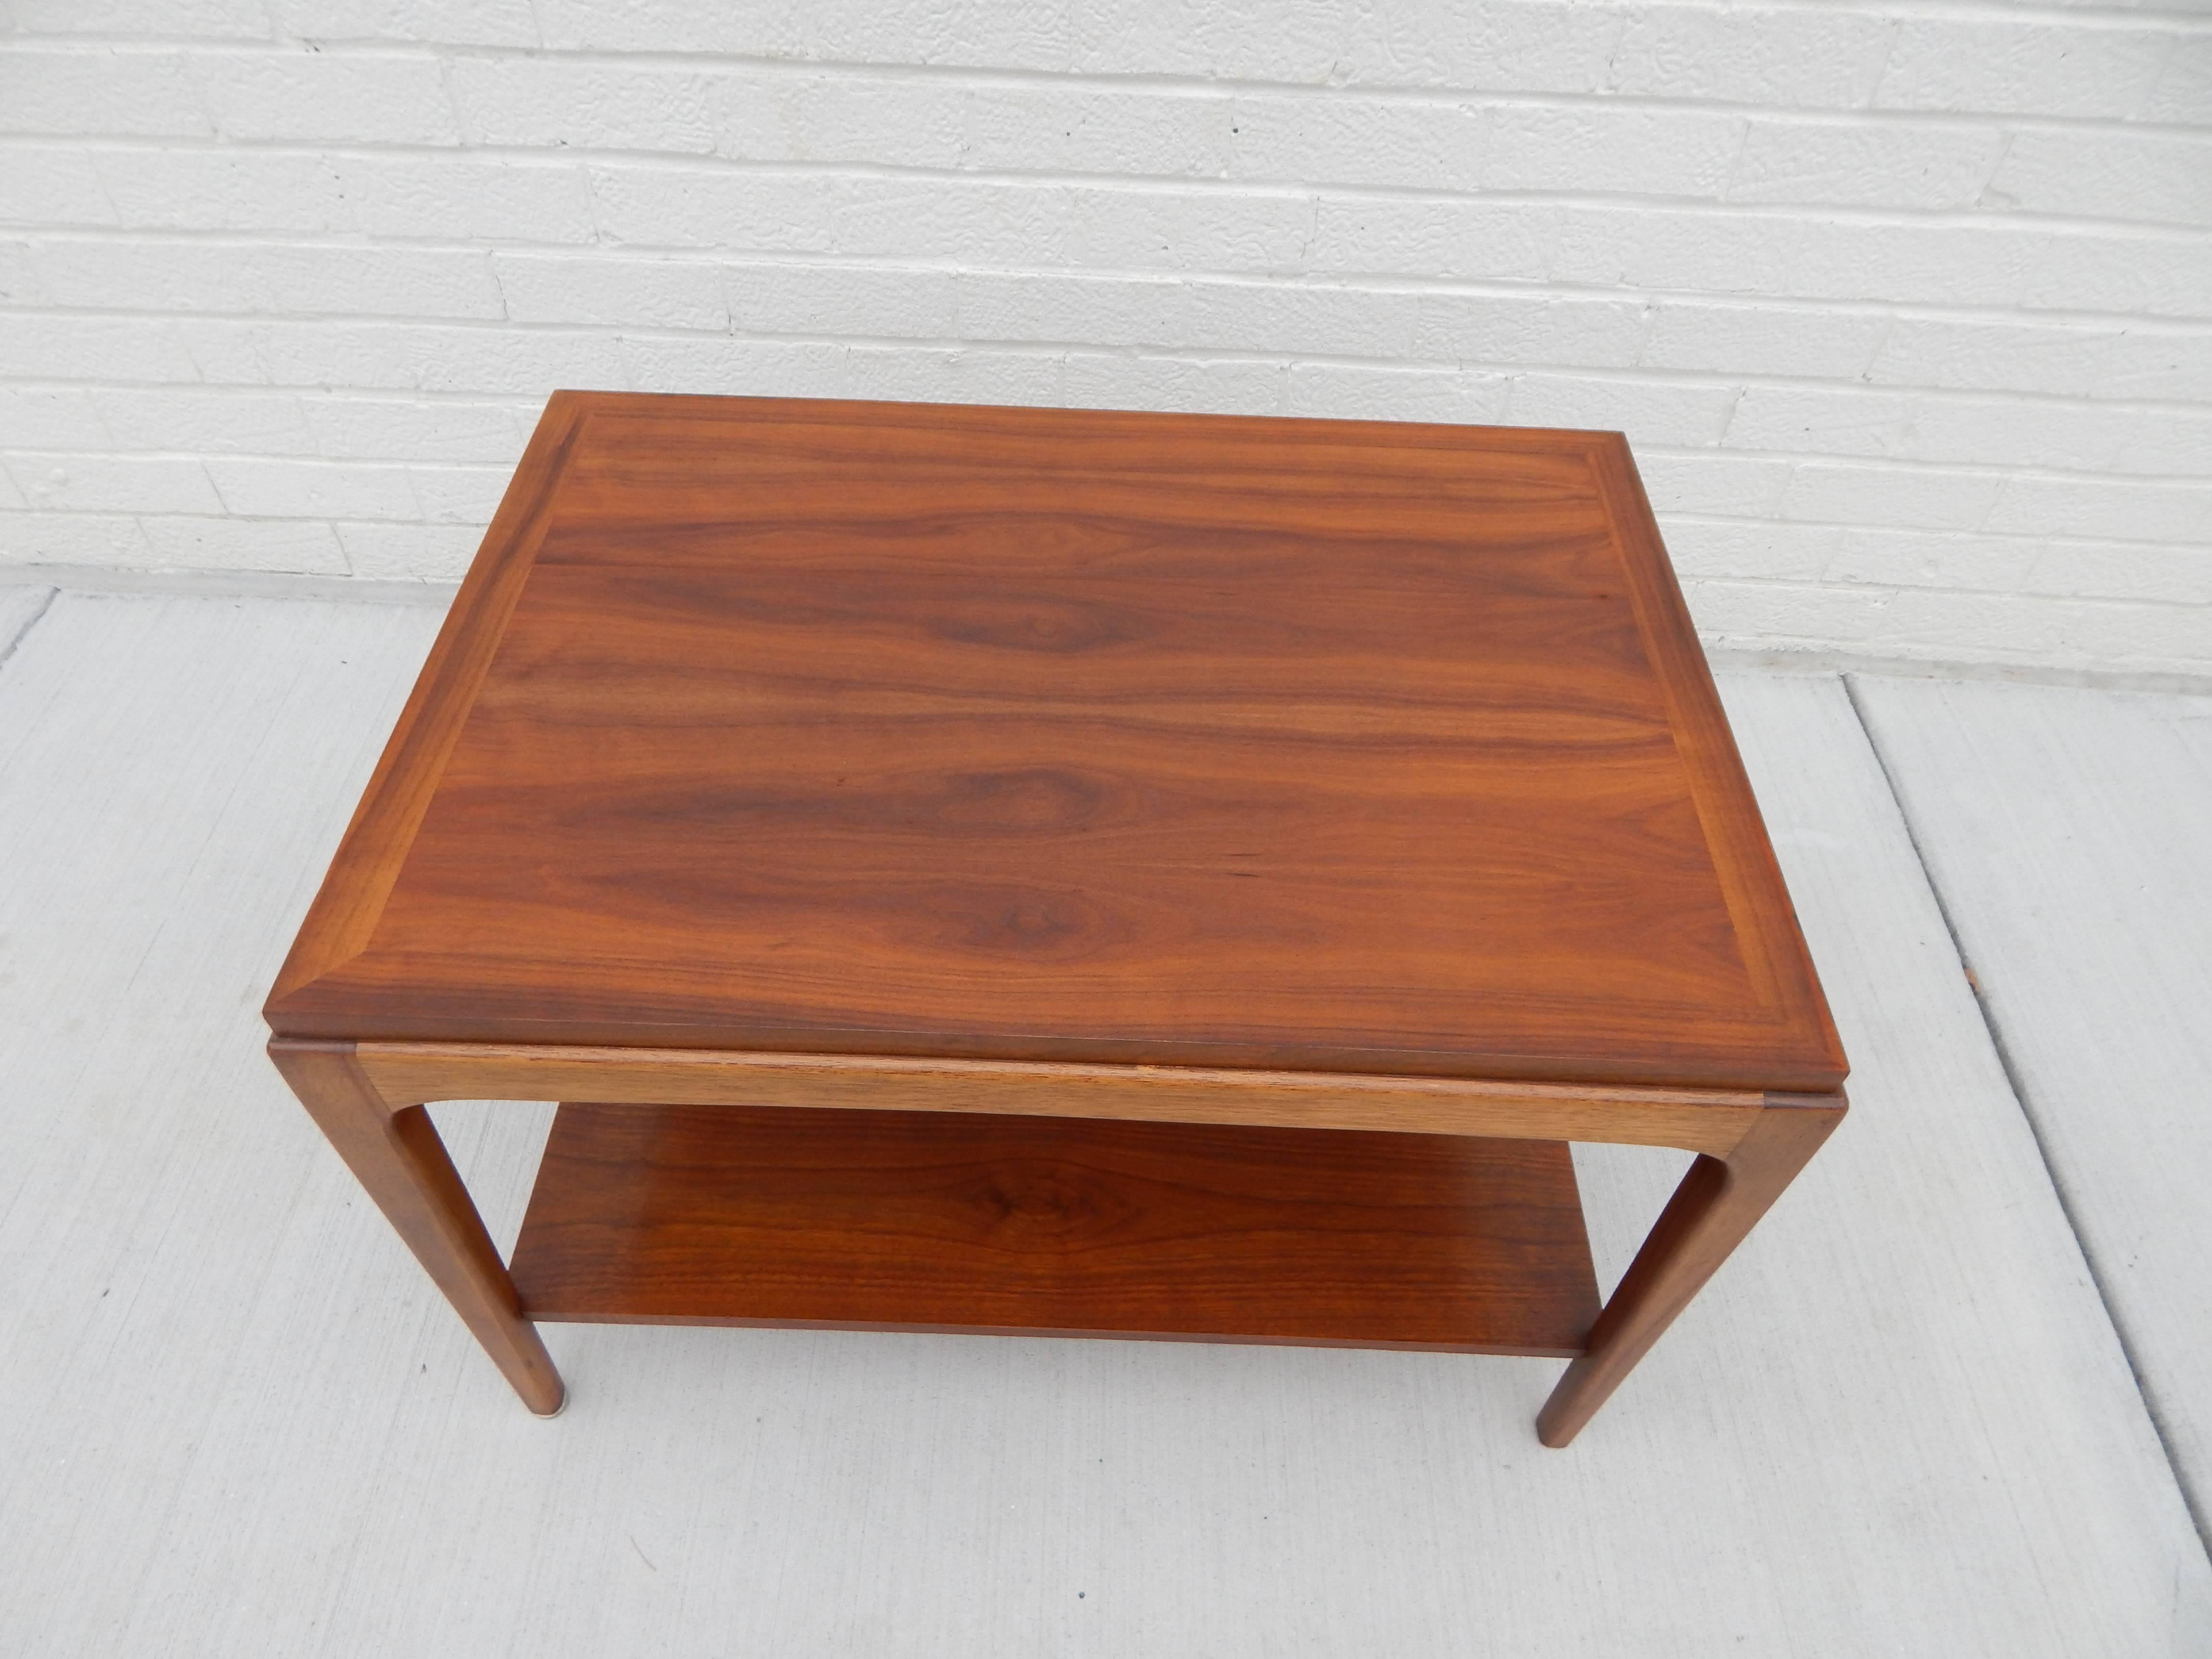 1960s lane walnut end table or side table. Beautiful wood and nice clean lines. Could also be used as a coffee table. Makers mark and serial number on bottom.